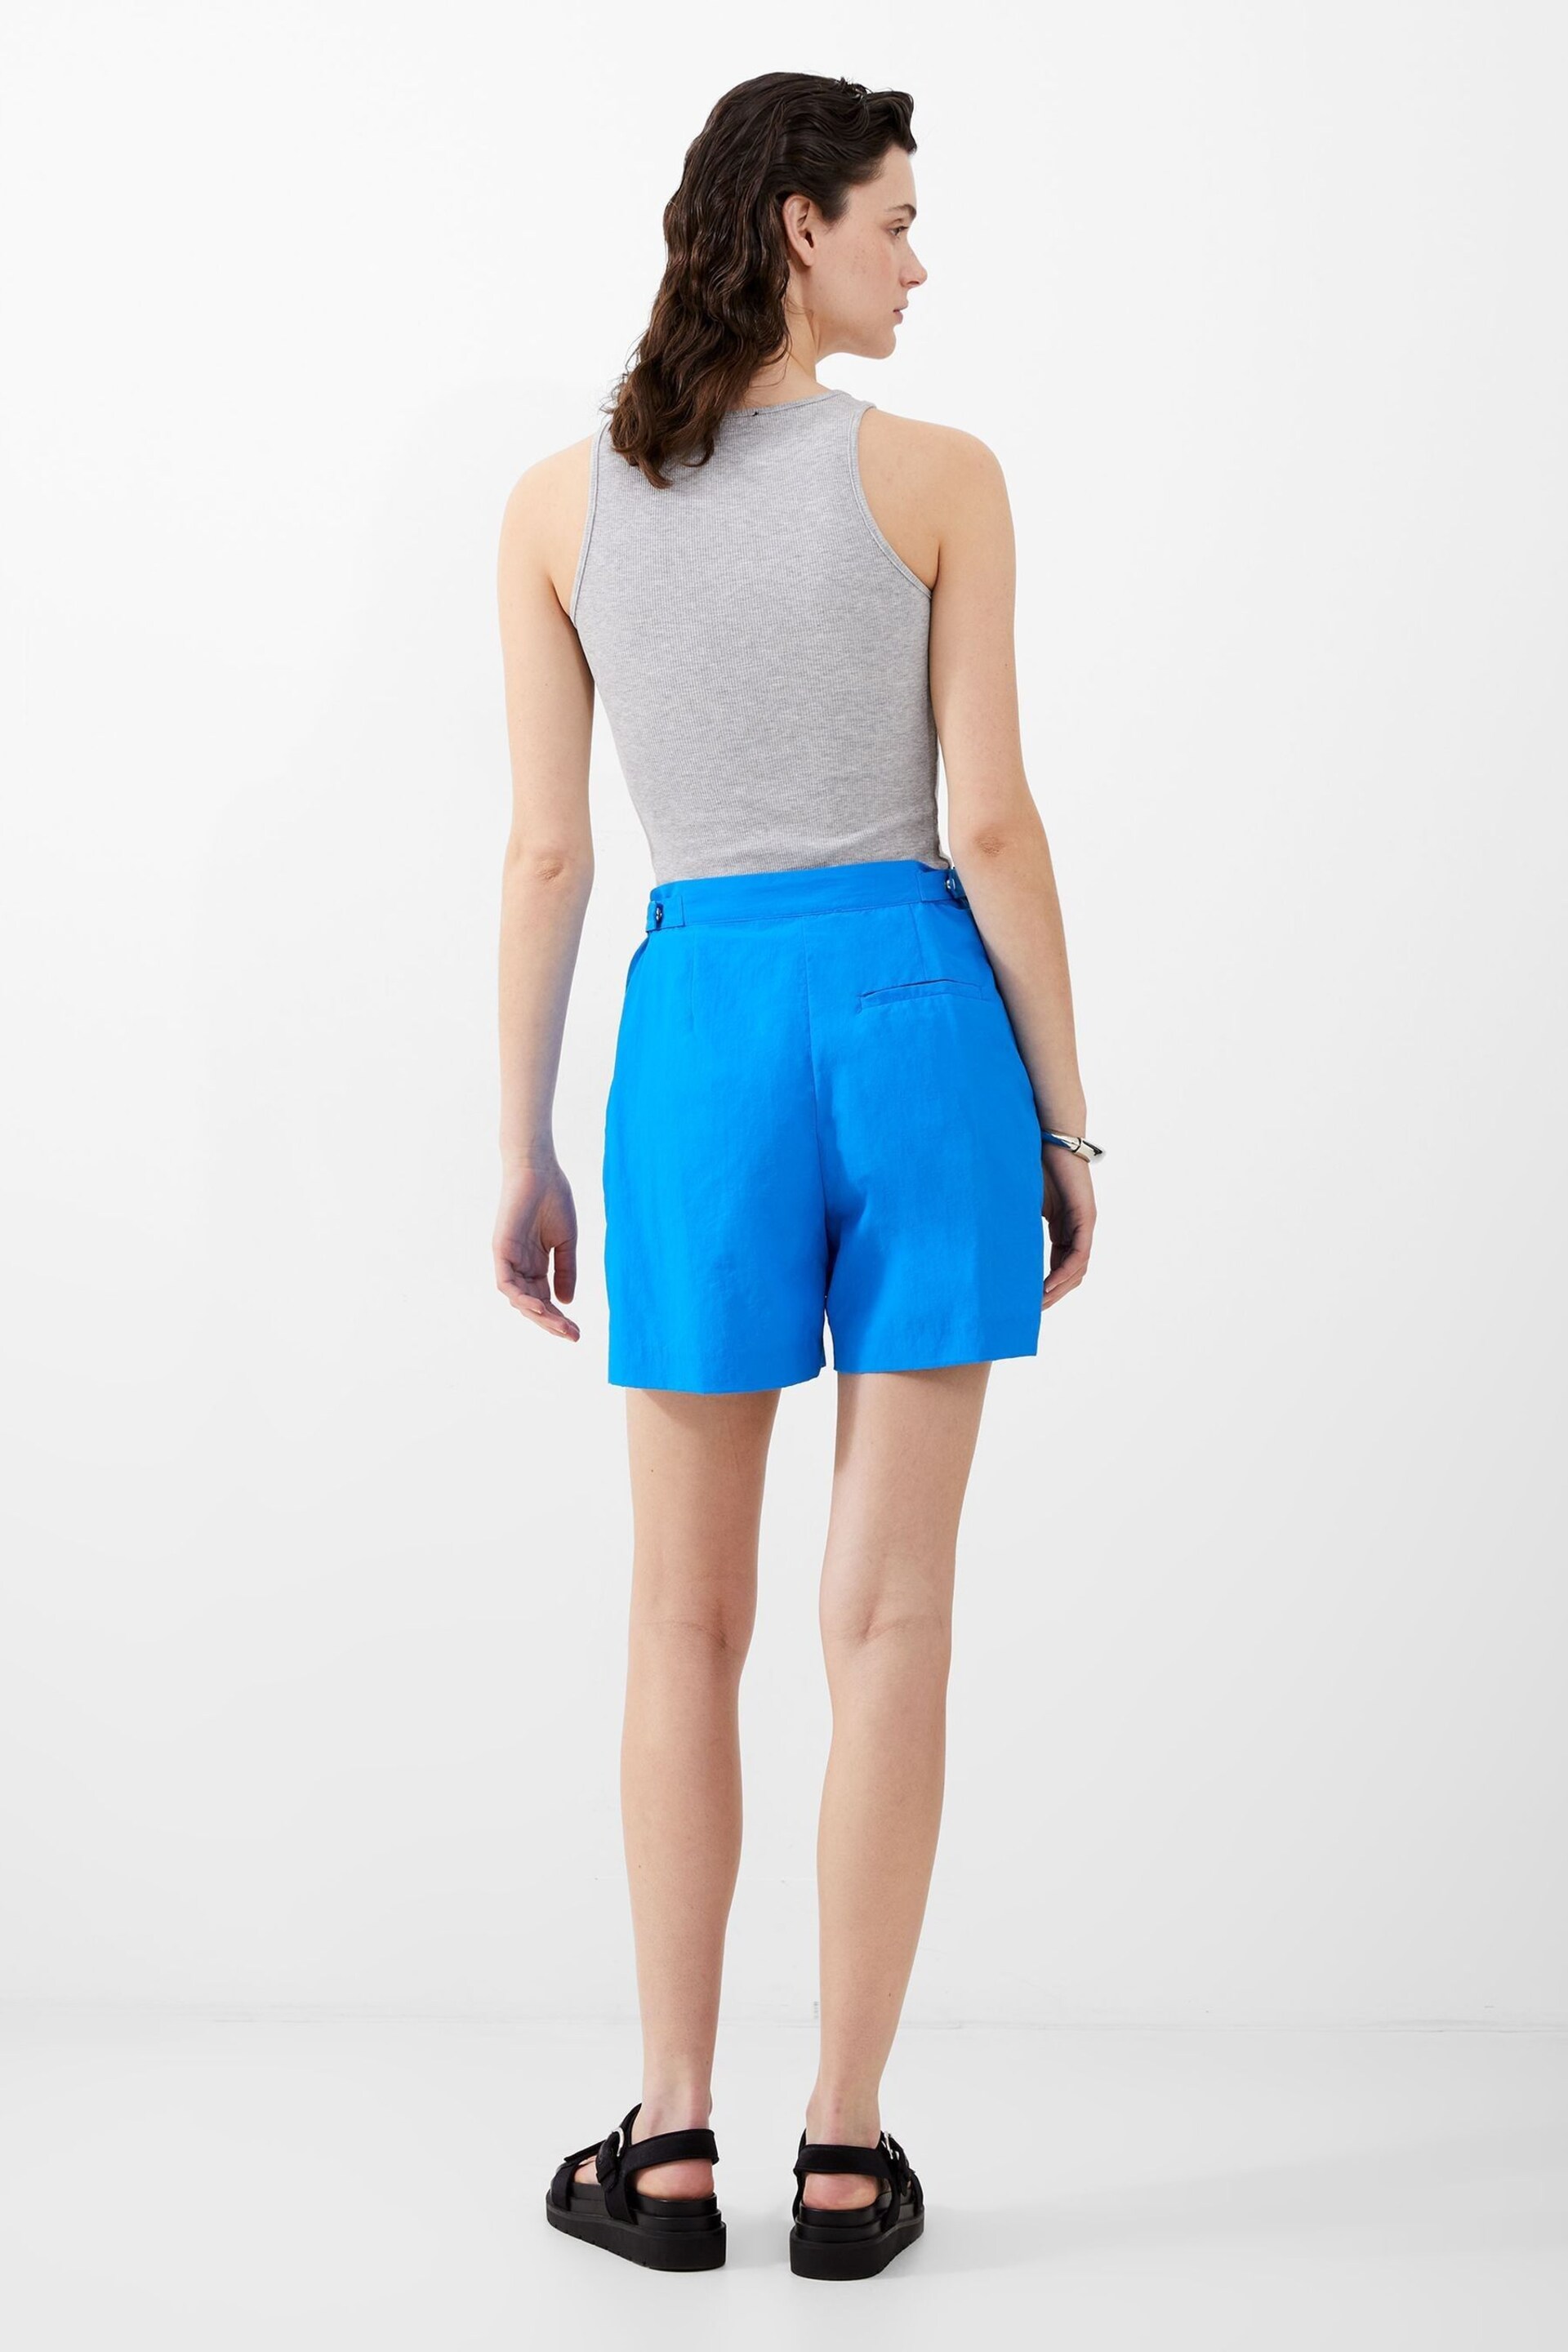 French Connection Alora Shorts - Image 4 of 4